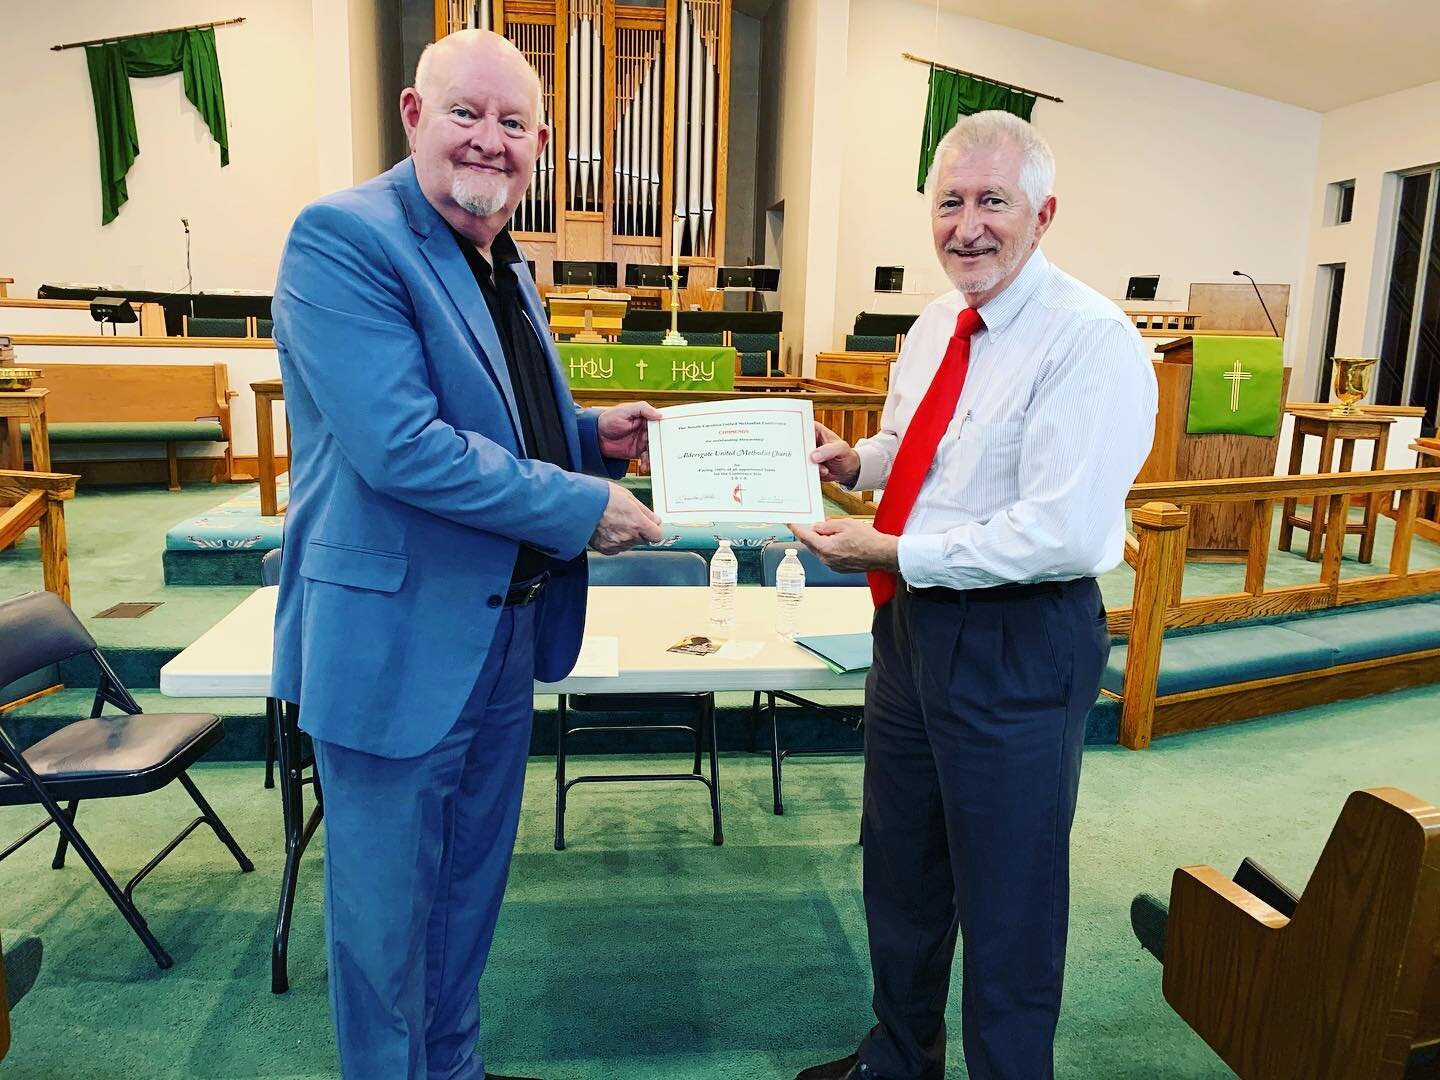 District Superintendent Rev. Joe Long recognizes Aldersgate UMC with a certificate for paying 100% of our apportionments in 2018, at the 2019 Charge Conference. Way to go, AUMC! #aldersgate #methodist #chargeconference2019 #GivingForGod #LivingForGod